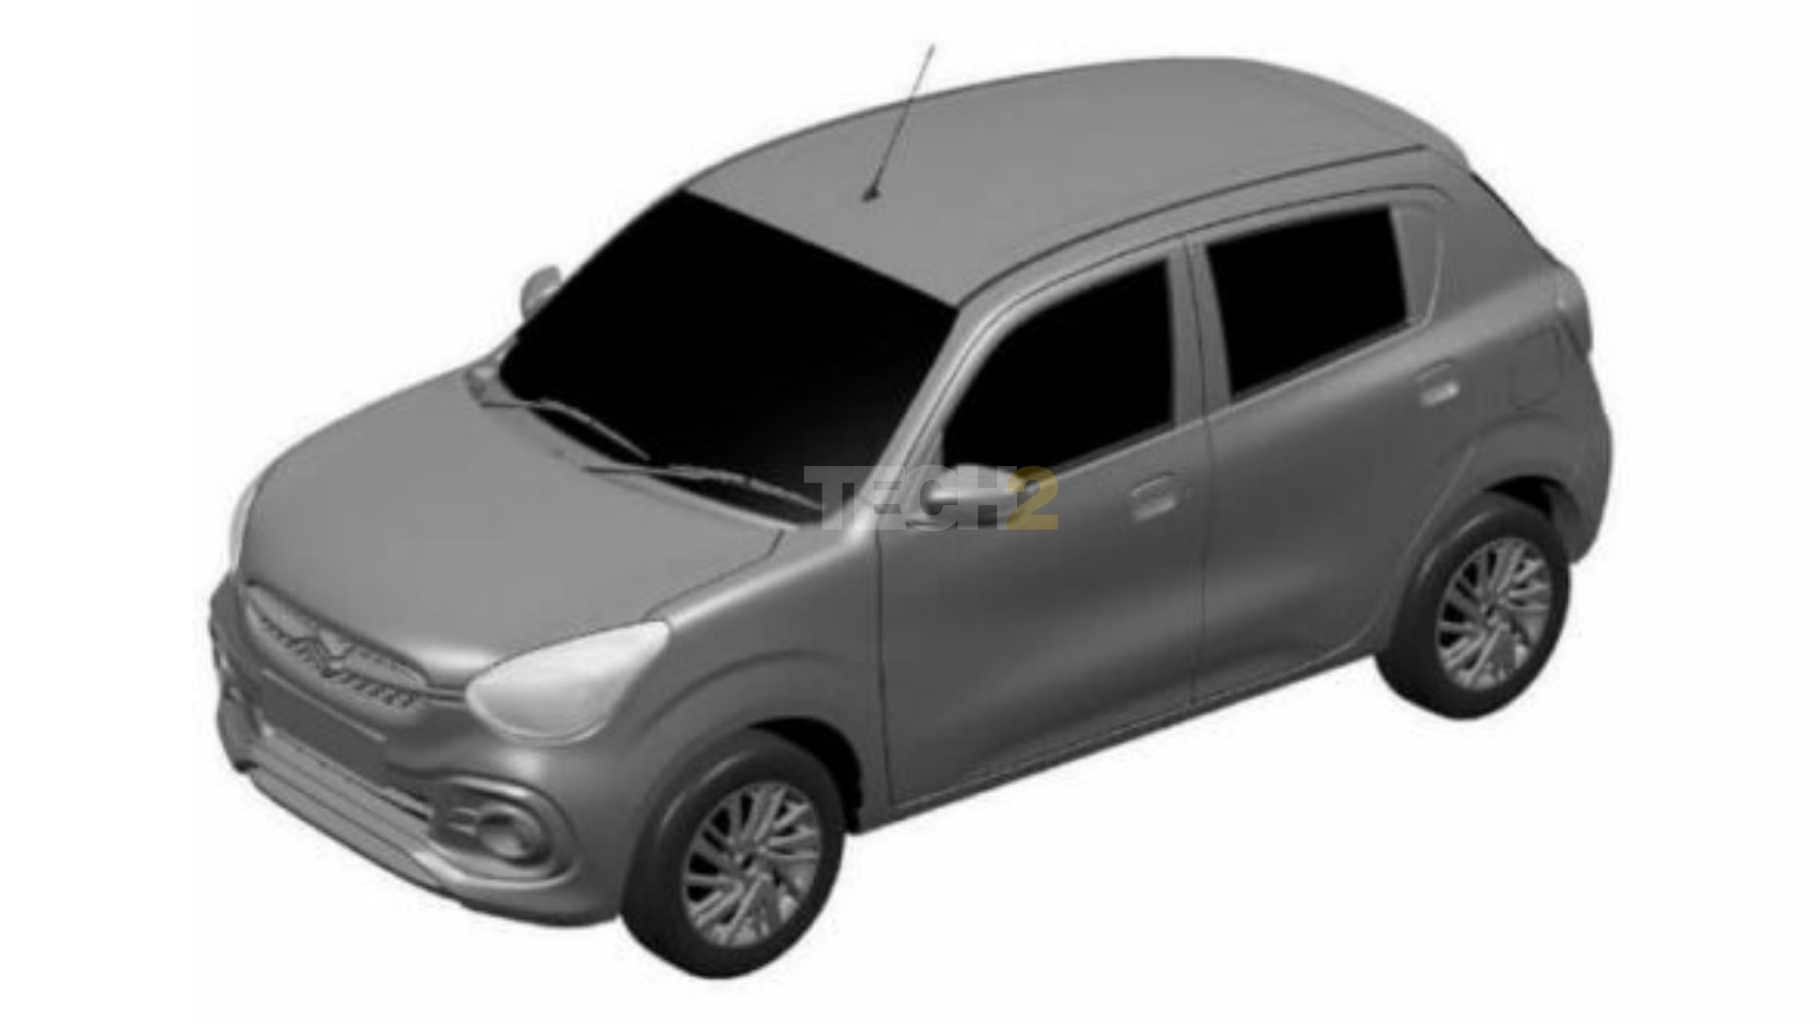 In its second generation, the 2021 Maruti Suzuki Celerio is expected to make the switch to the Heartect platform.